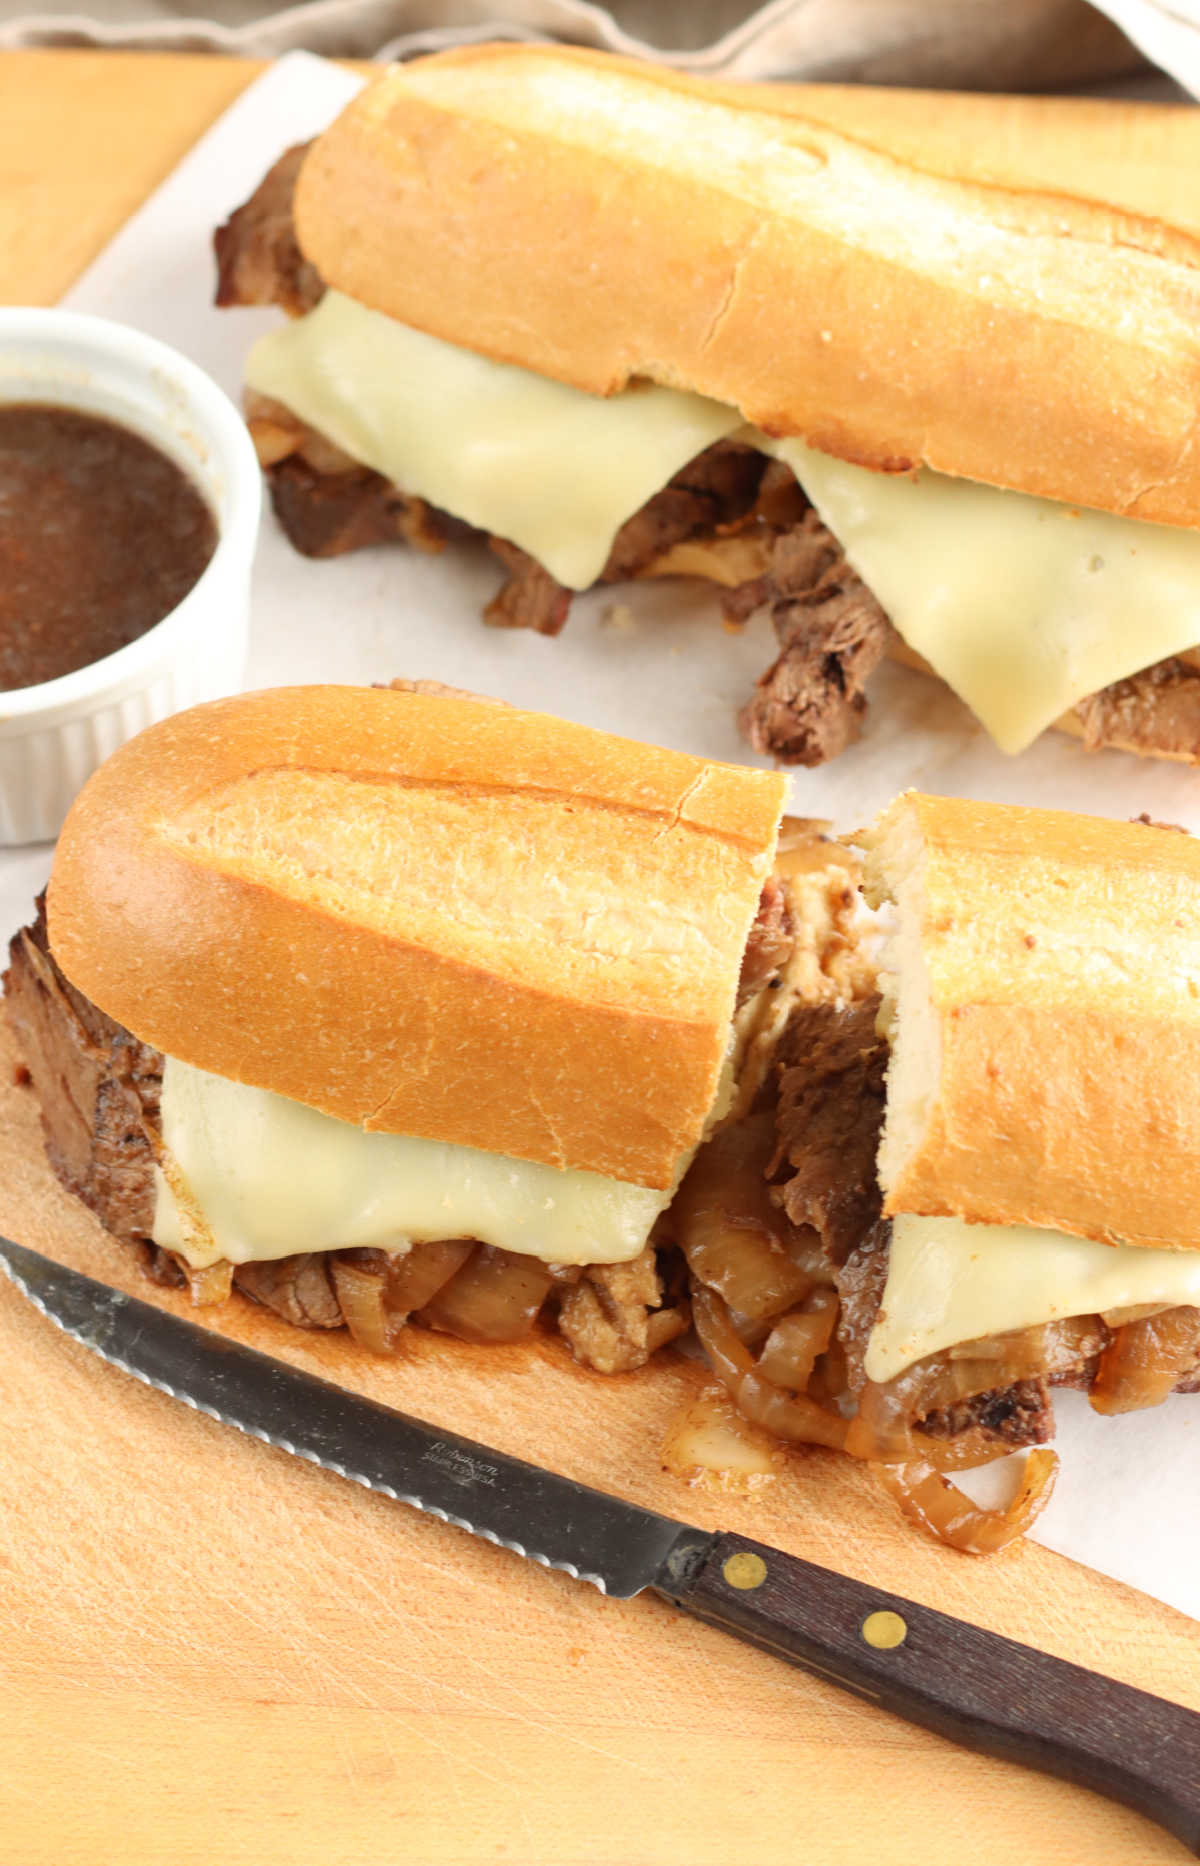 Tender slow cooked beef for this delicious French Dip sandwich.